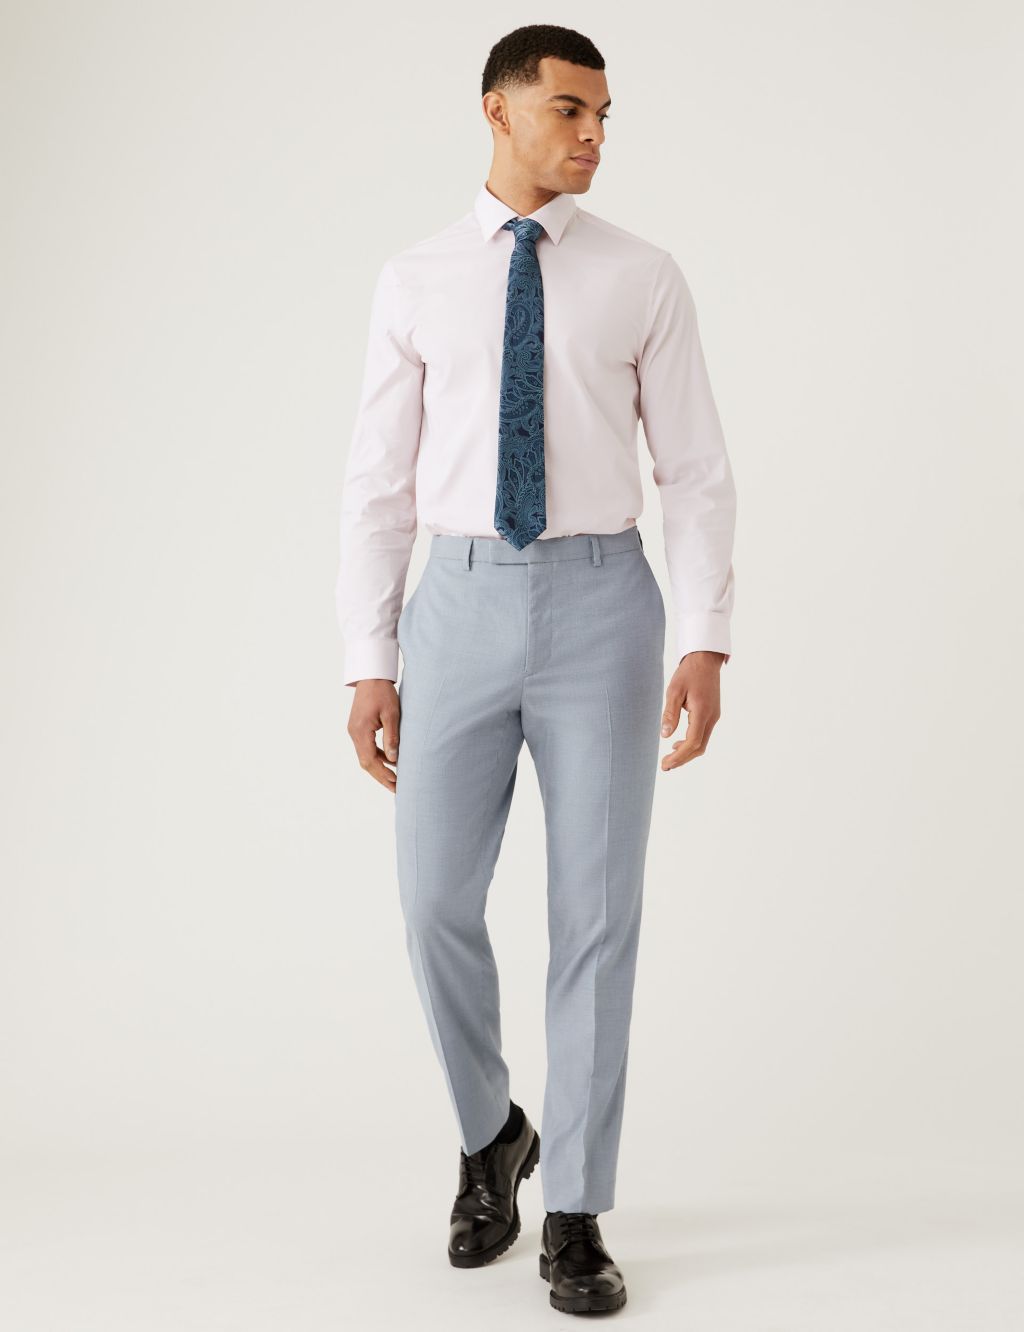 Slim Fit Puppytooth Suit image 4